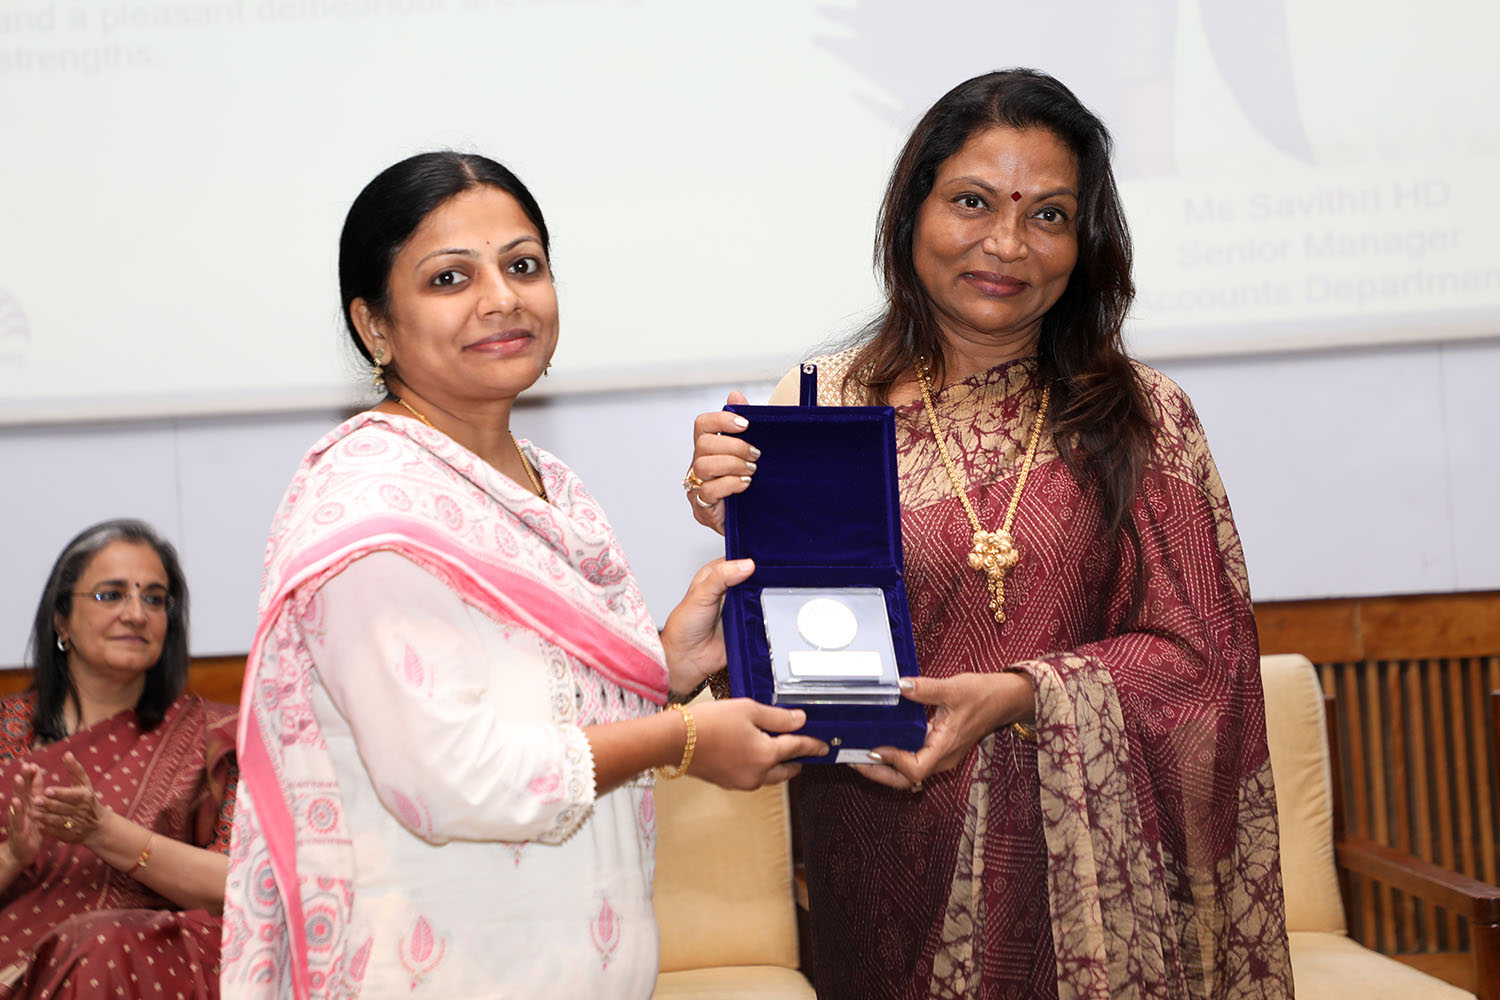 Ms Savithri HD, Senior Manager, Accounts Department, receives the award for 10 years of service from Ms. Kalpana Saroj, Member of the Board of Governors, IIMB during the institute’s 49th Foundation Day celebrations.